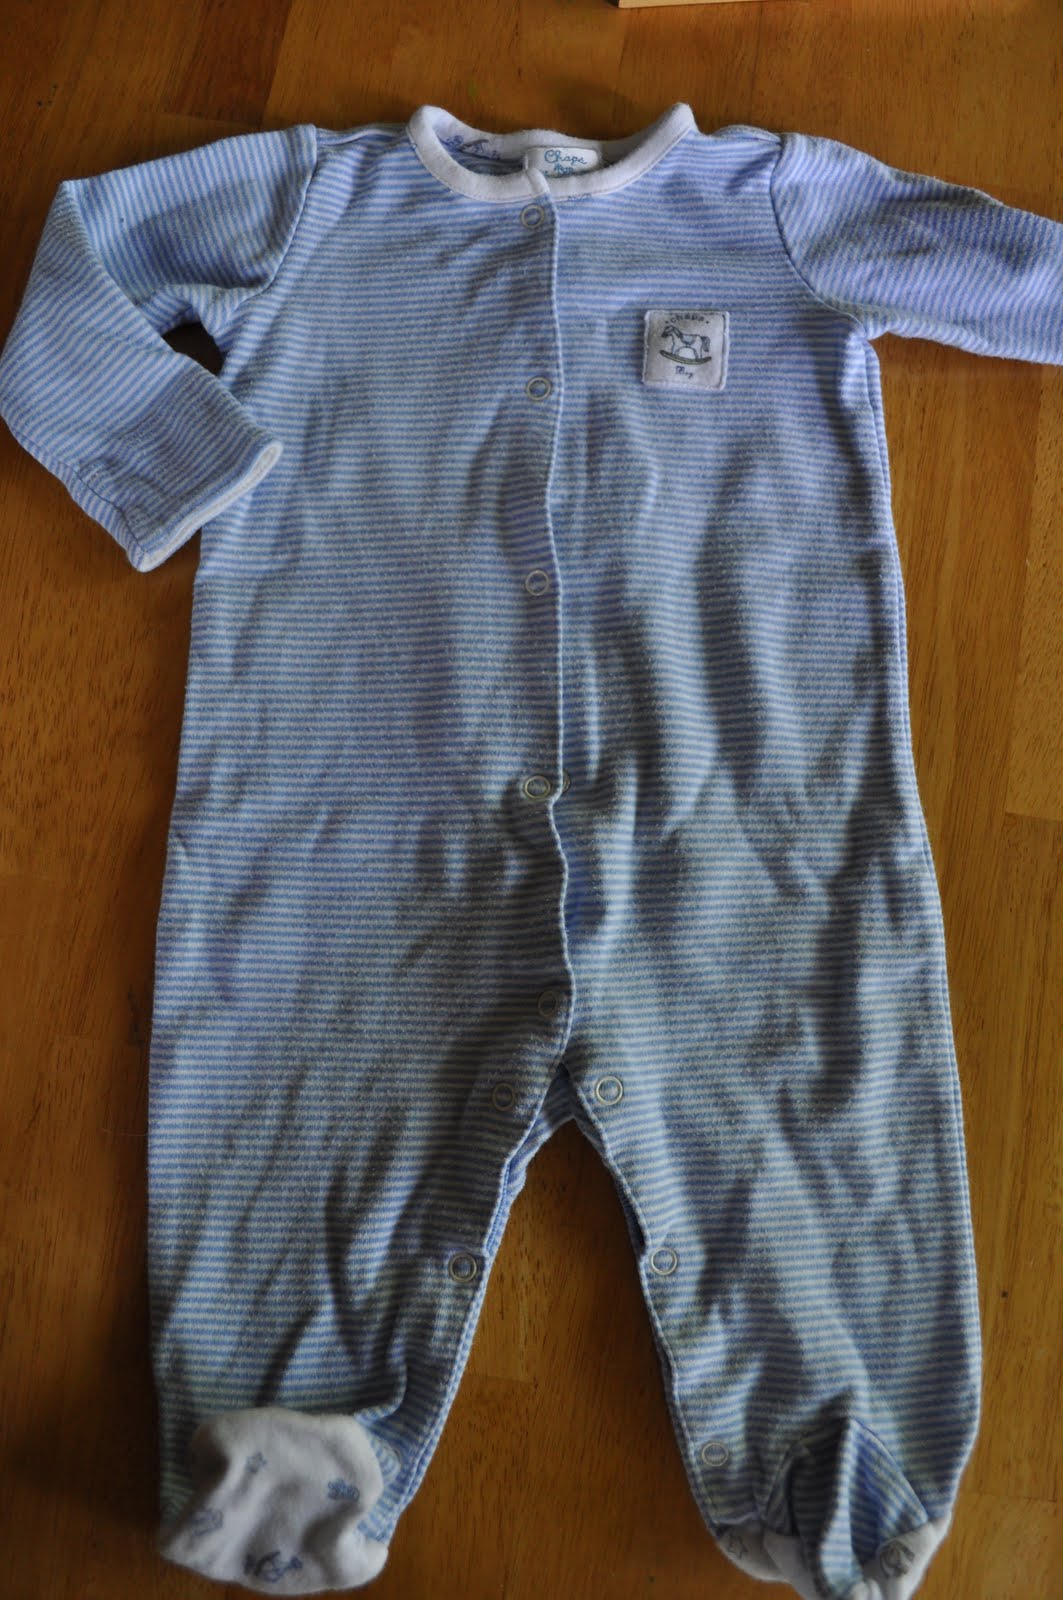 selling some stuff: 6-9 (and 6-12) month boys clothing